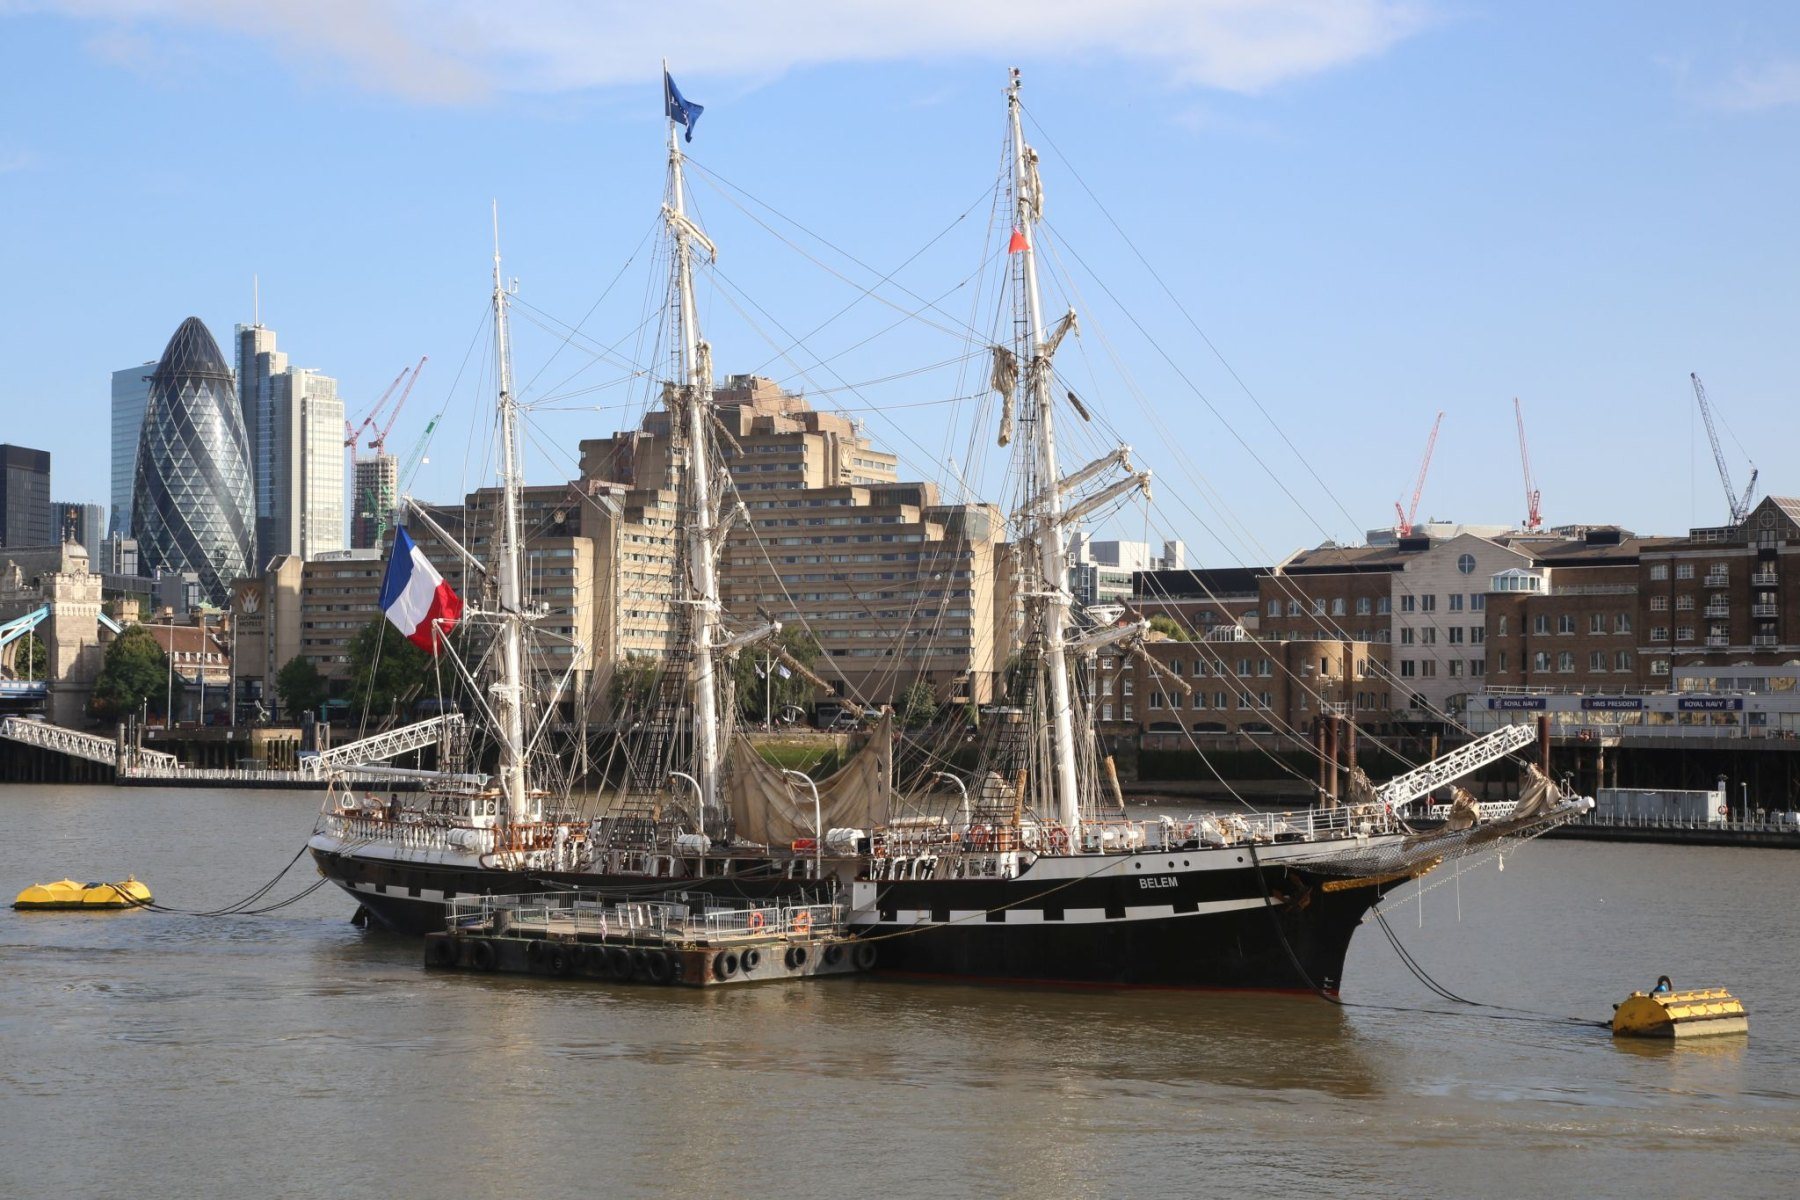 French sail training ship Belem seen in London moored off Tower Bridge close to Tower Bridge. 13-Aug-2019.